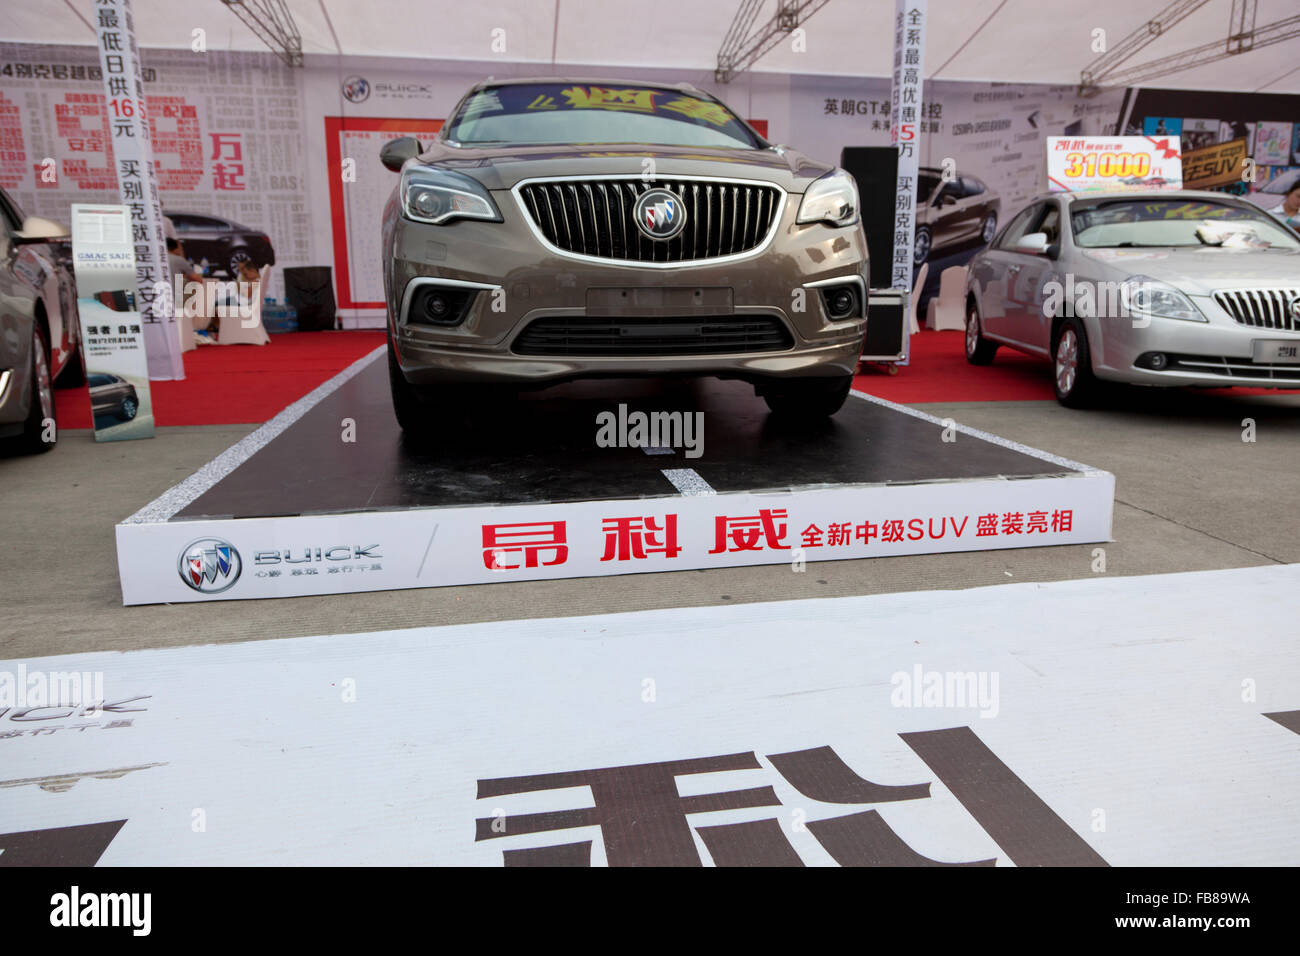 Branded and expensive SUVs and cars being exhibited at a trade fair in a Chinese city. Stock Photo